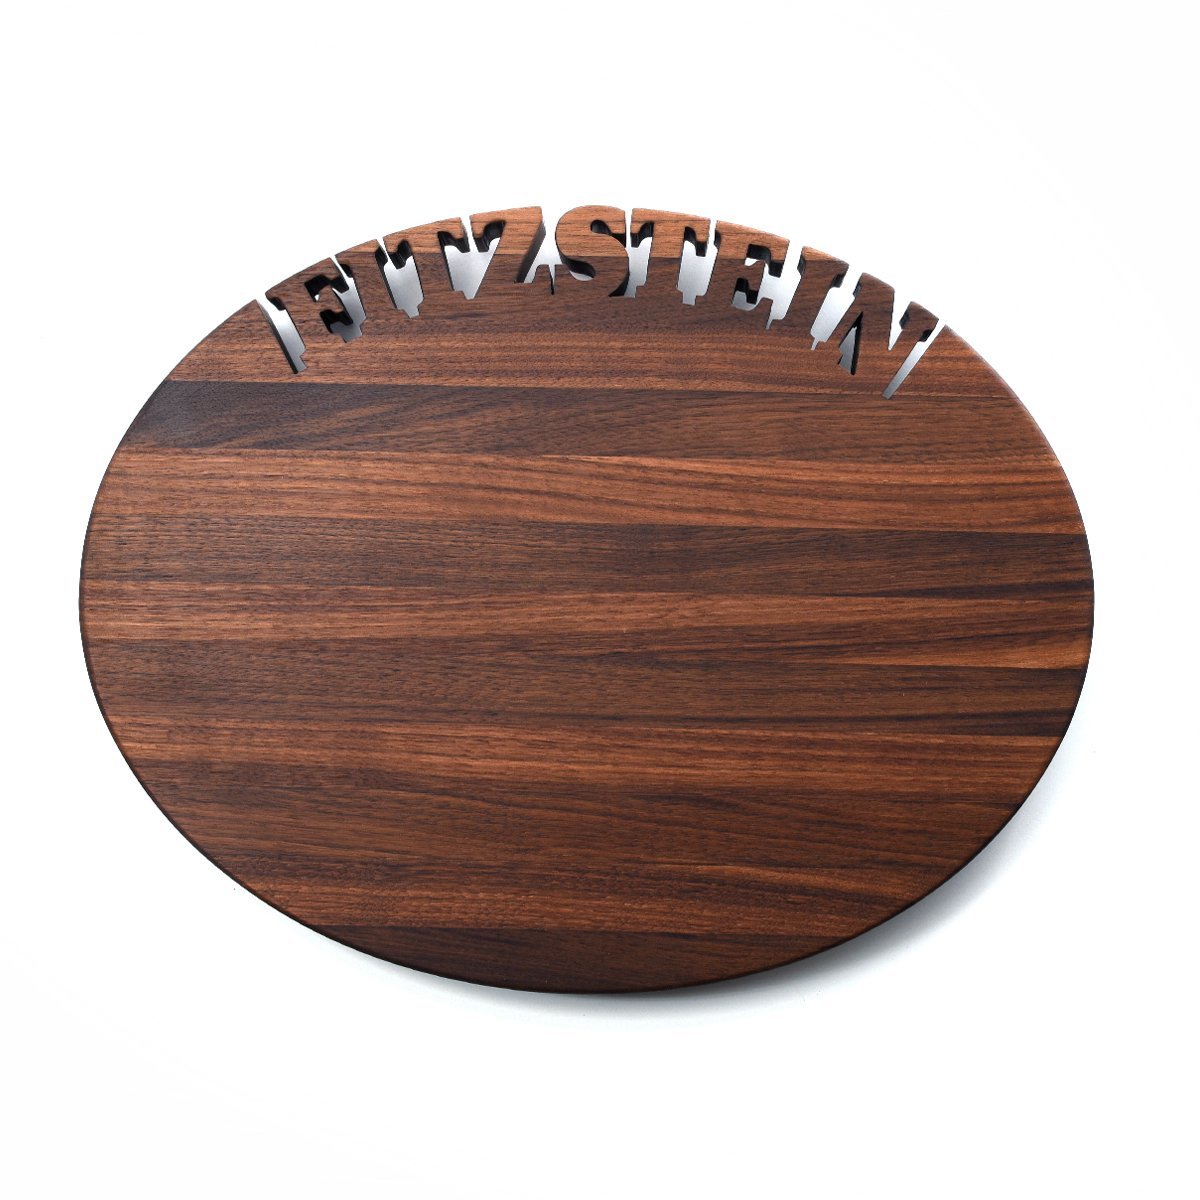 Personalized Oval Wood Cutting Board